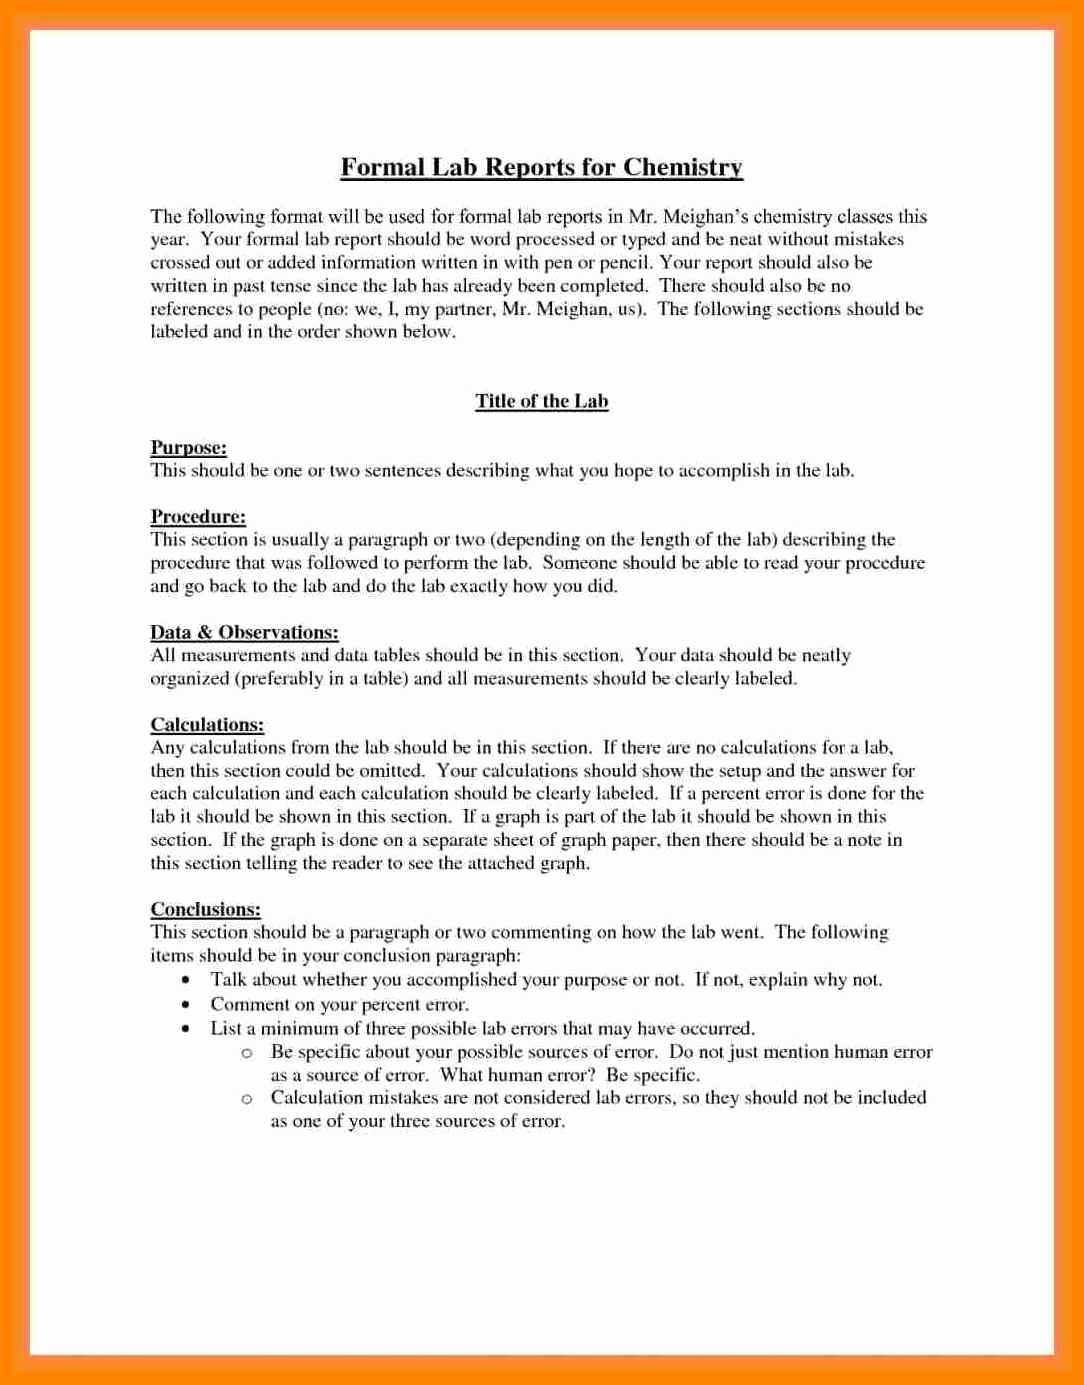 003 Formal Lab Report Example Best Write Up Template Of With Regard To Formal Lab Report Template